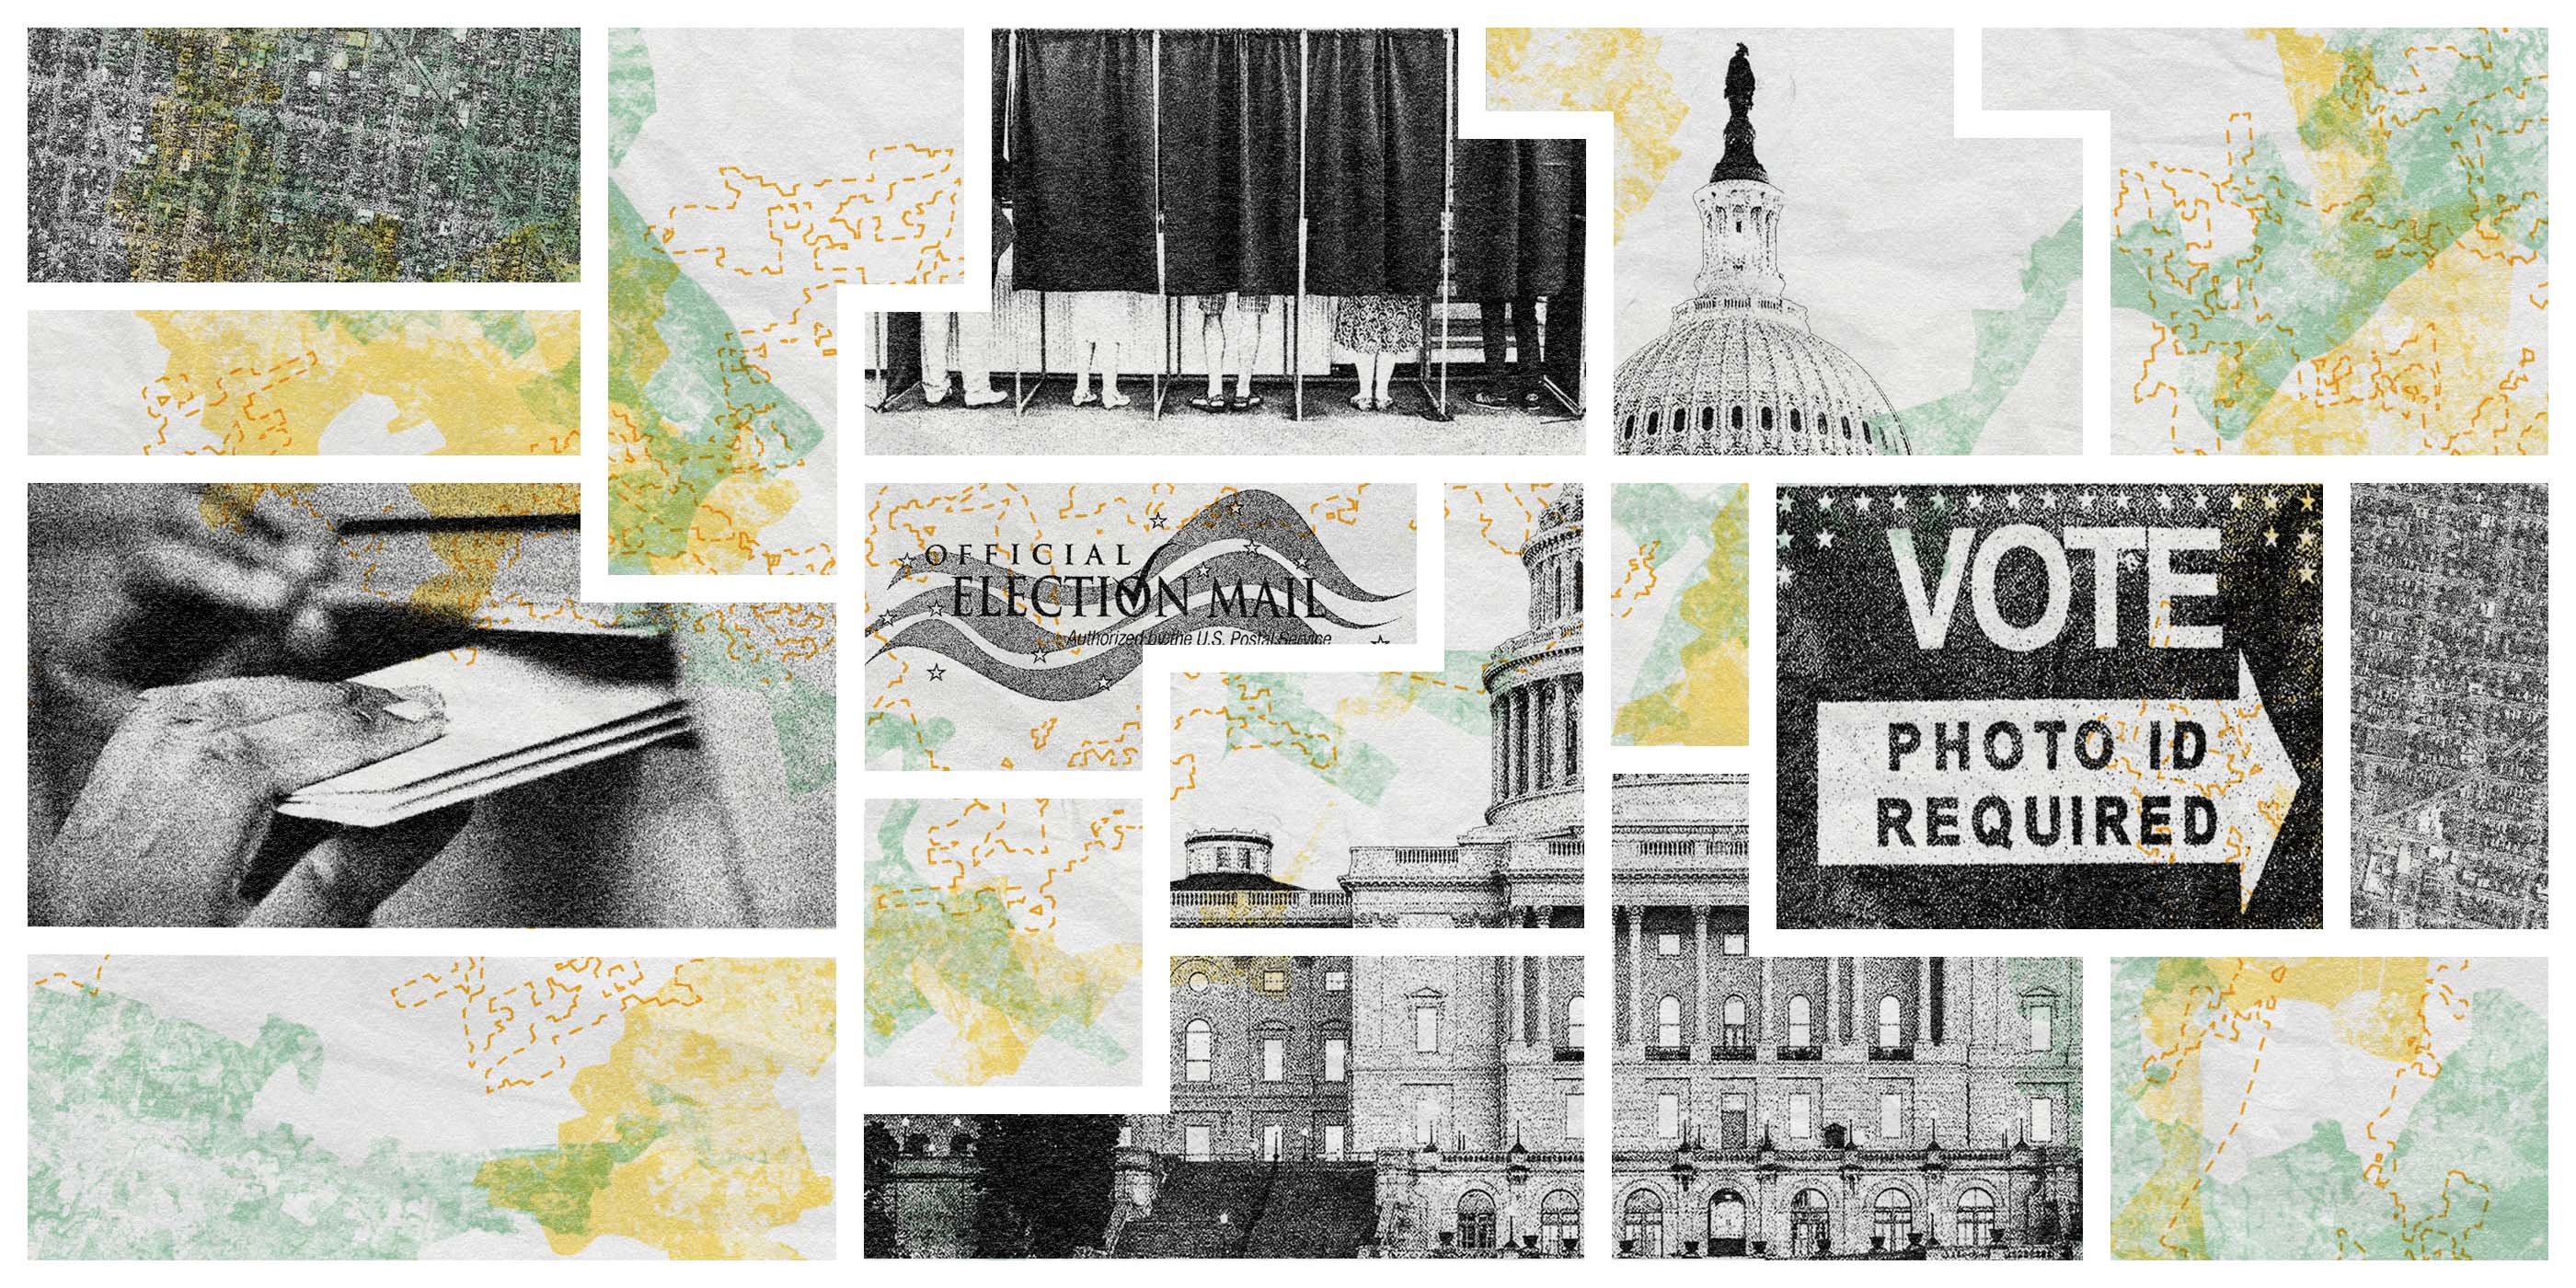 A collage of voting related images: a mail in ballot, a ballot box, the Capitol building and people voting behind a curtain